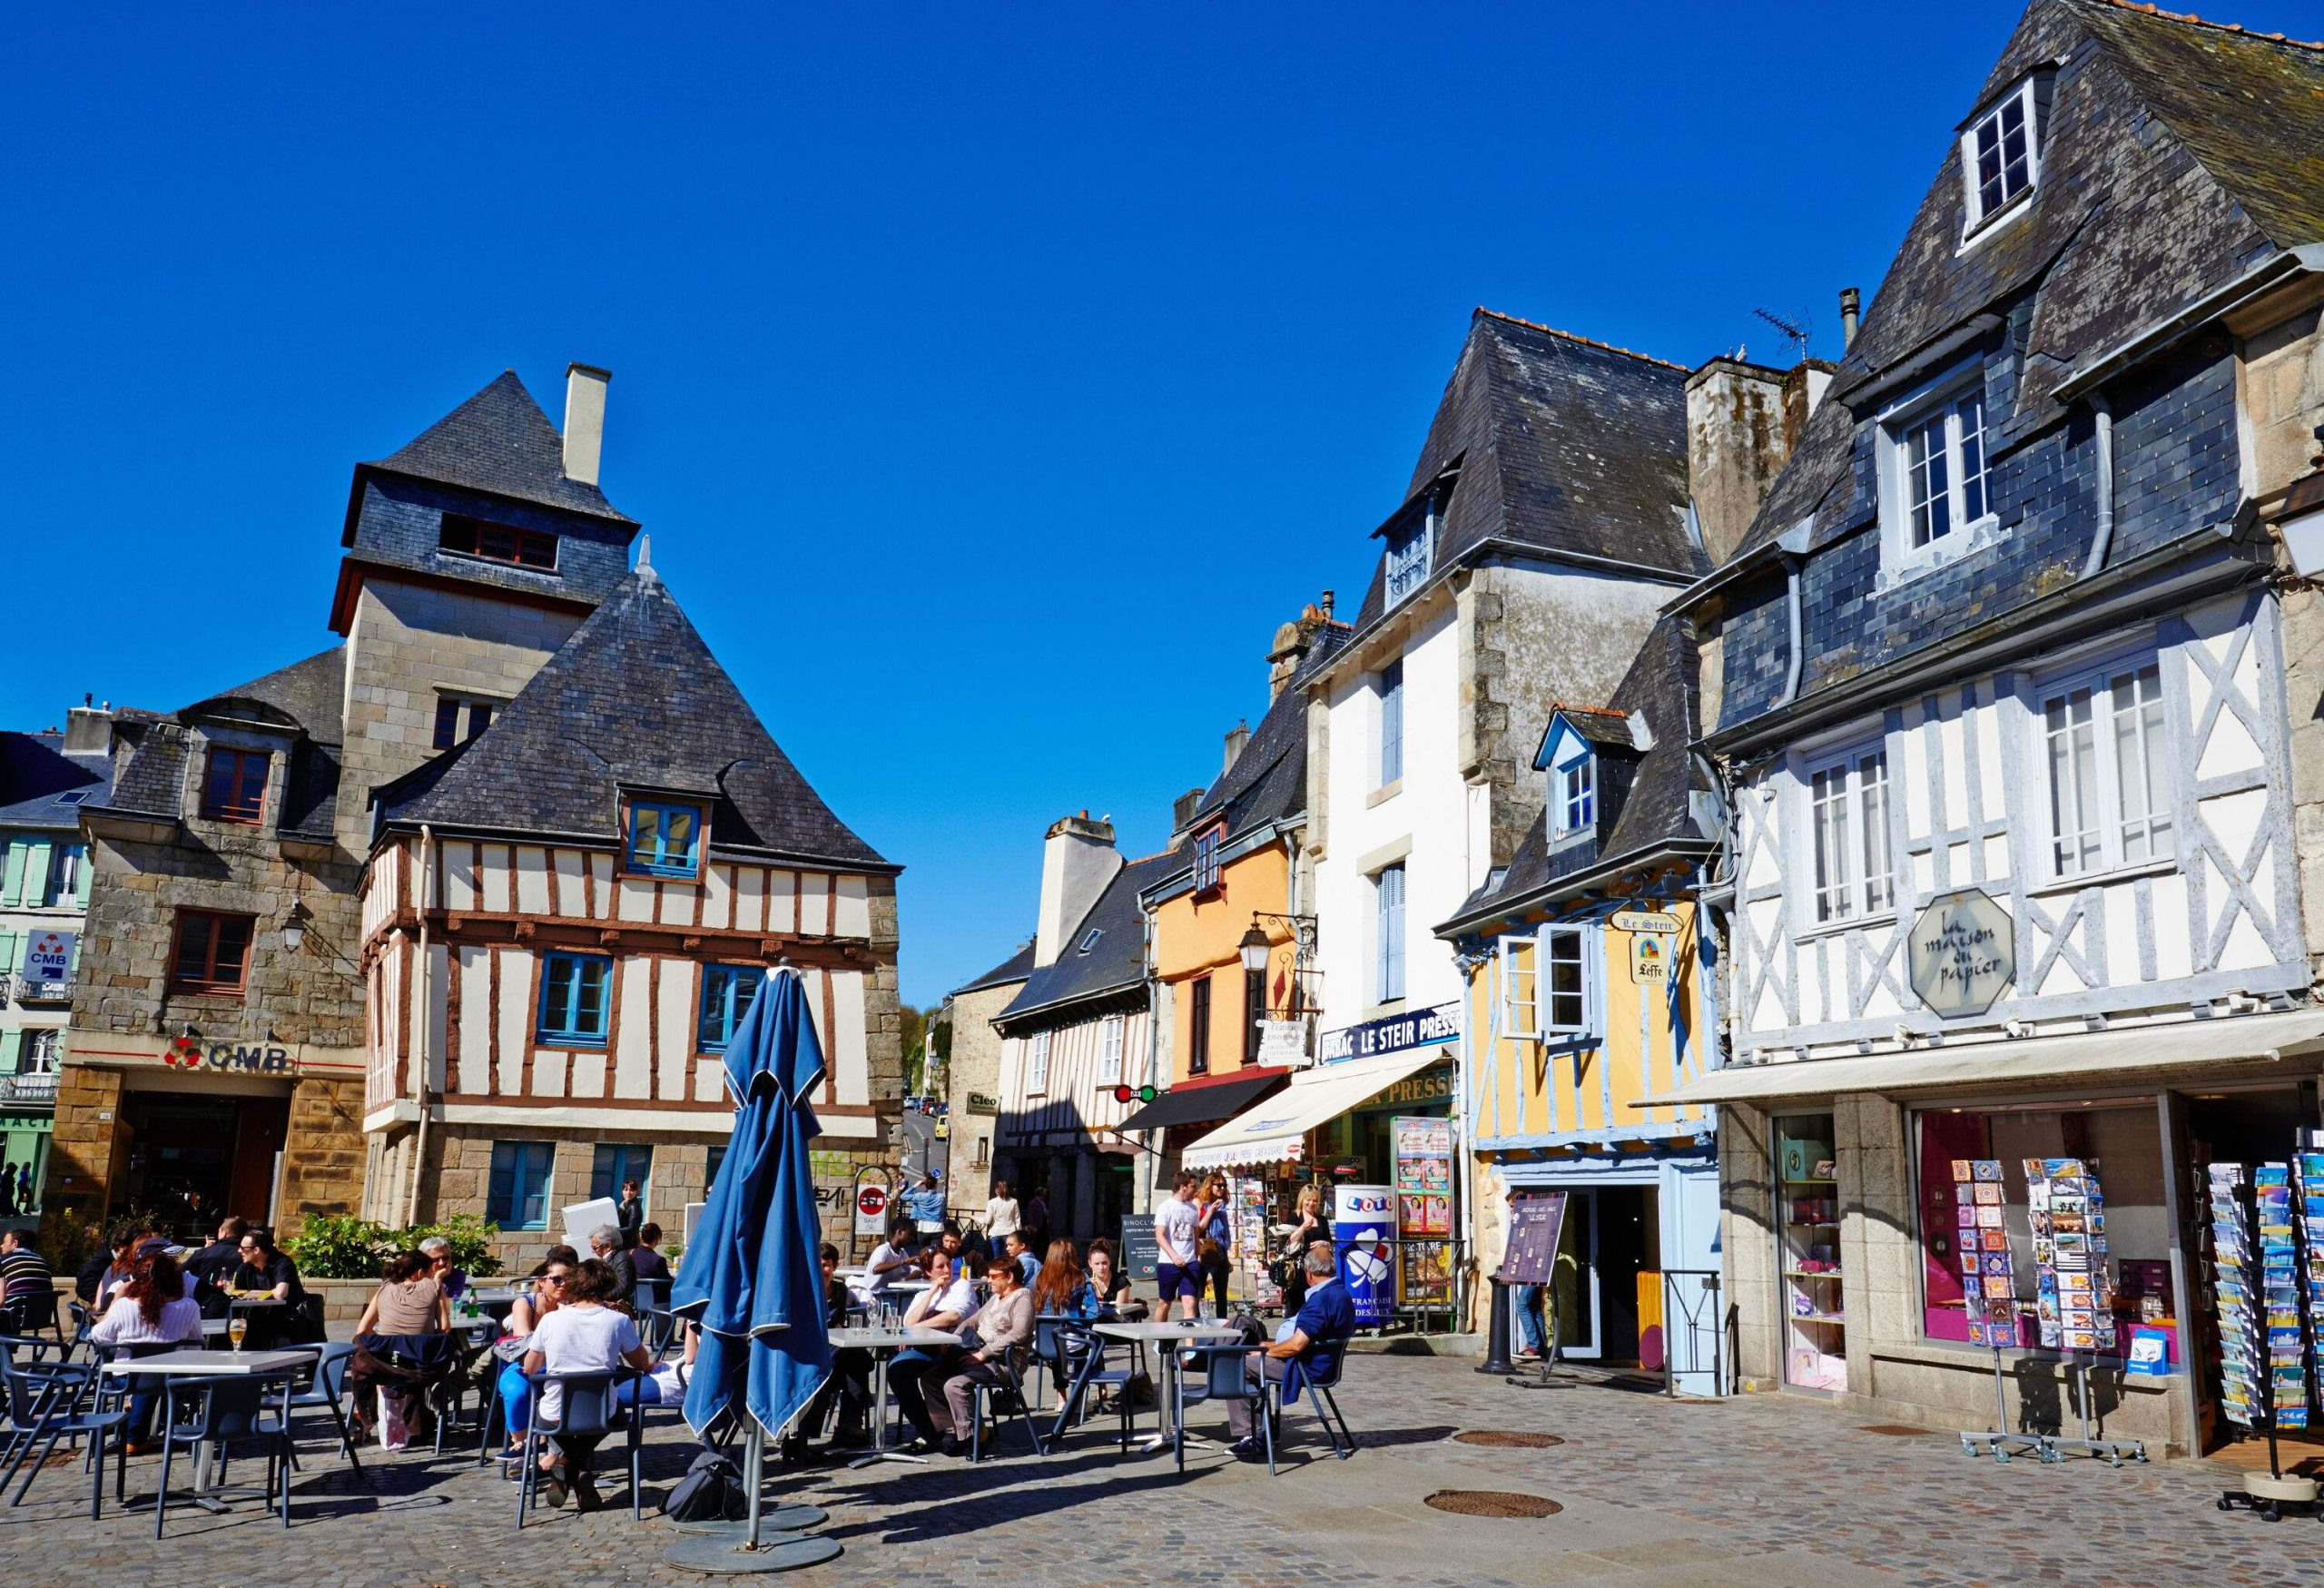 A lively town square with people dining outdoors in front of timber-framed structures.